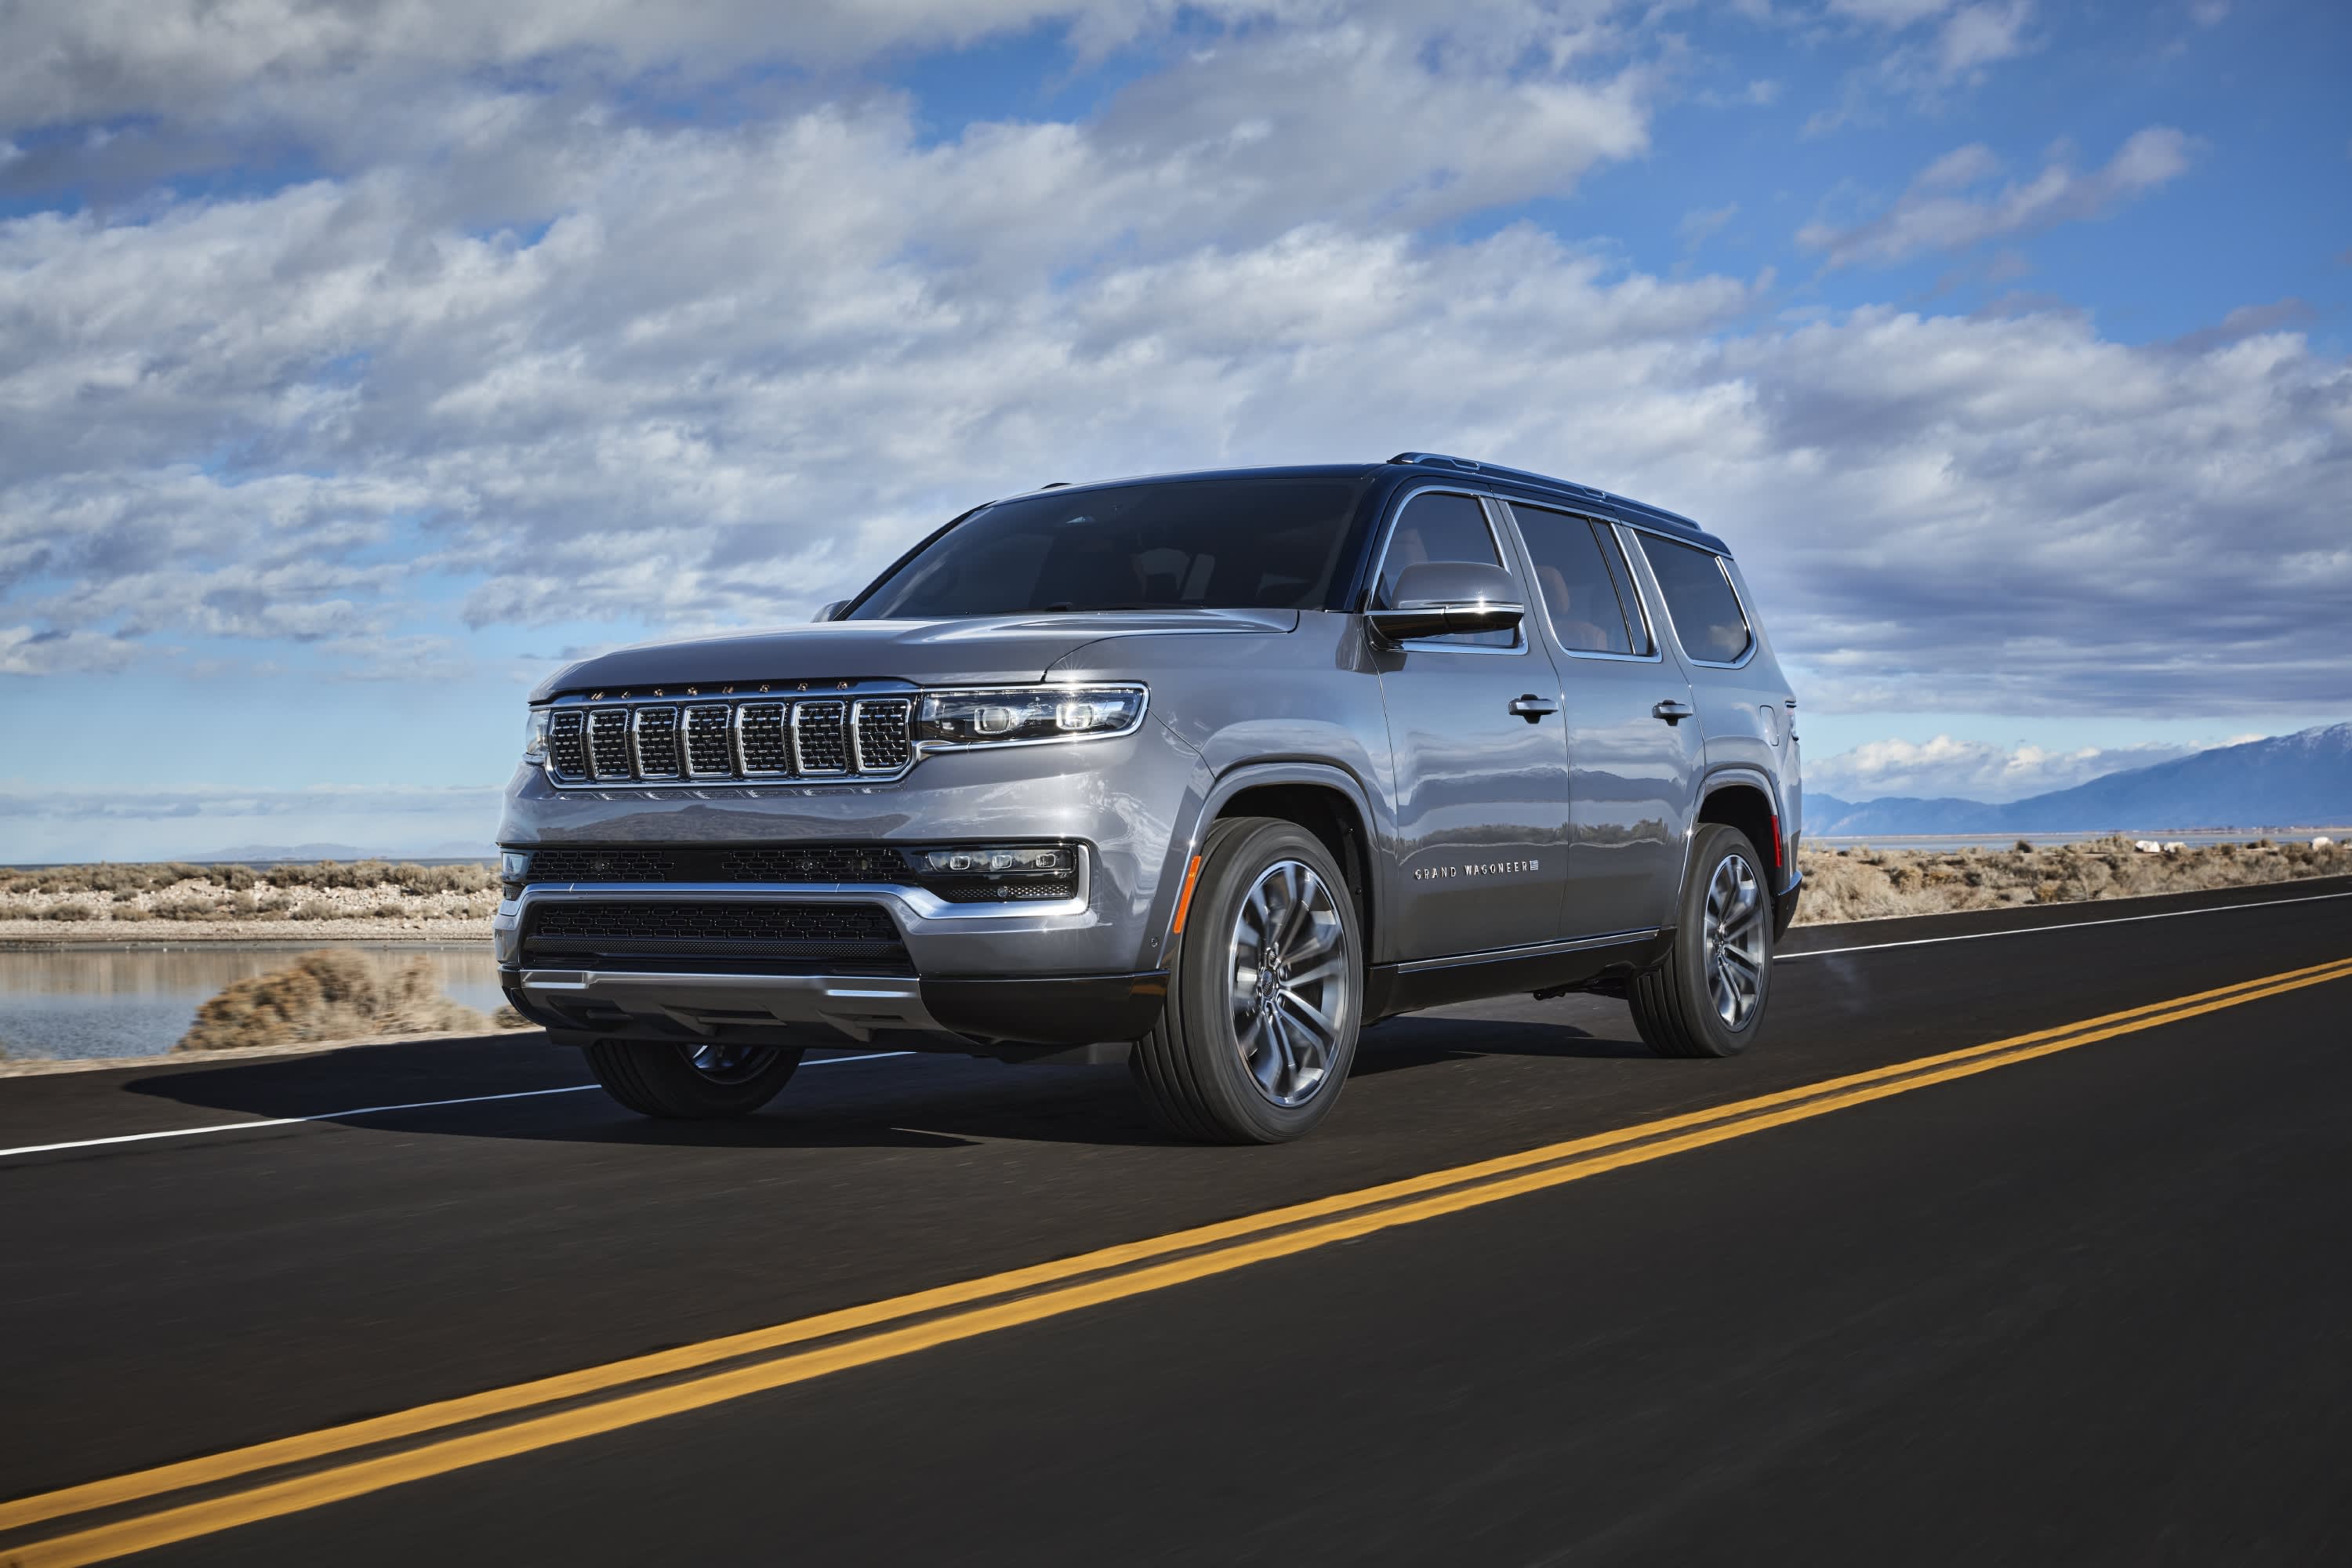 Jeep unveils long-awaited Grand Wagoneer SUV, which exceeds $ 111,000